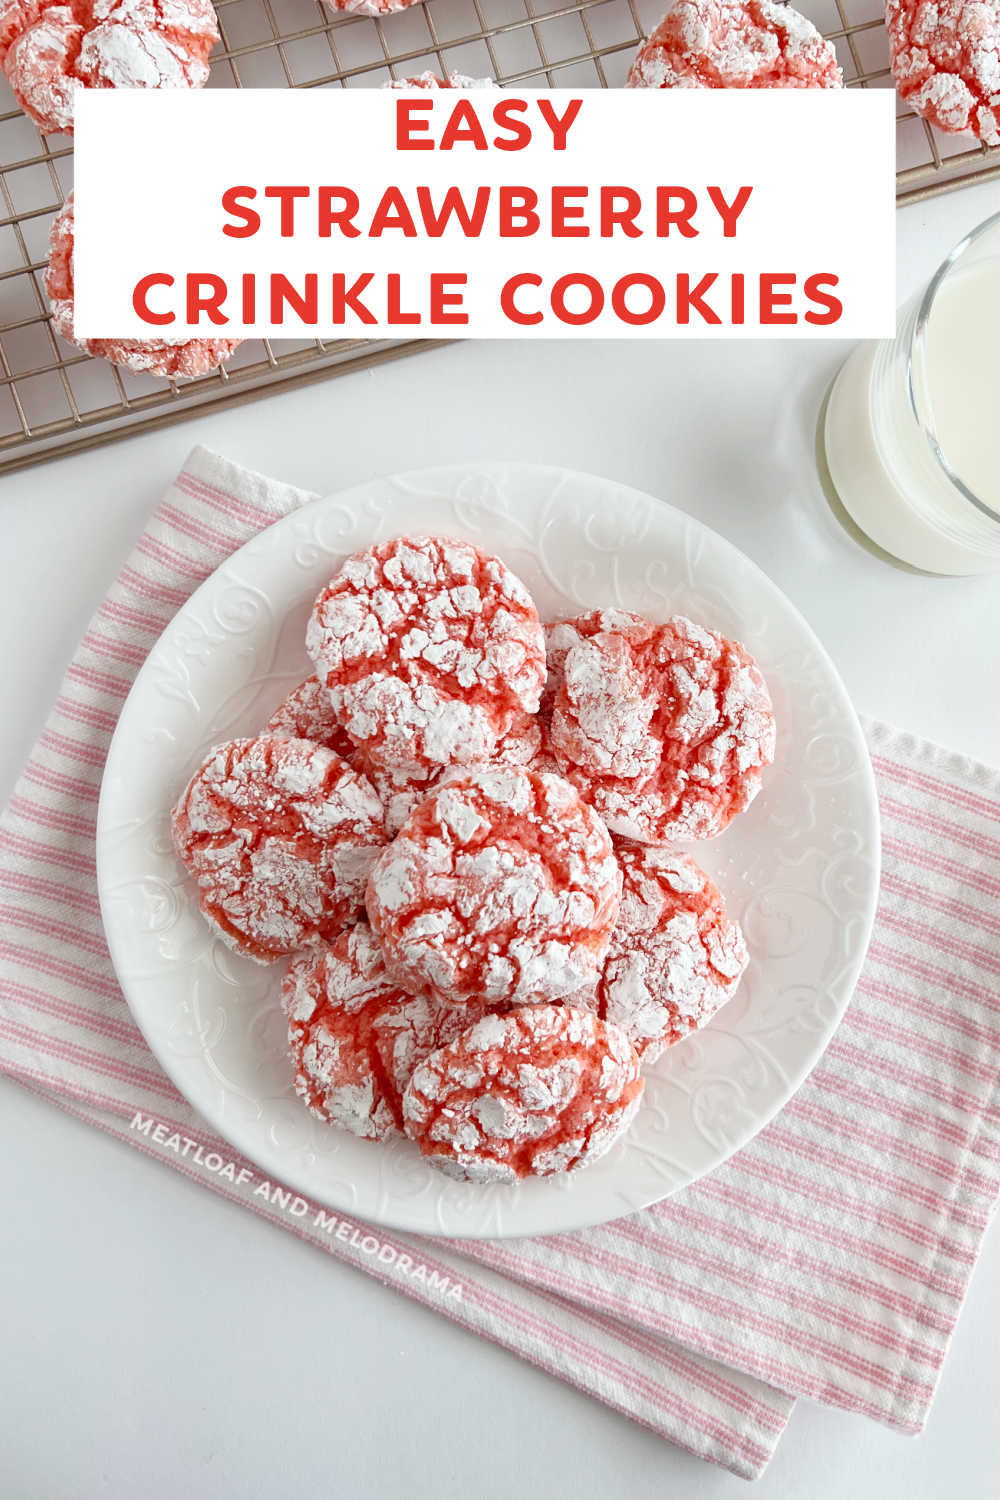 Easy Strawberry Crinkle Cookies made from cake mix and Cool Whip are perfect for Valentine's Day, Easter and spring. This easy cookie recipe makes soft, chewy cookies that taste as good as they look! via @meamel